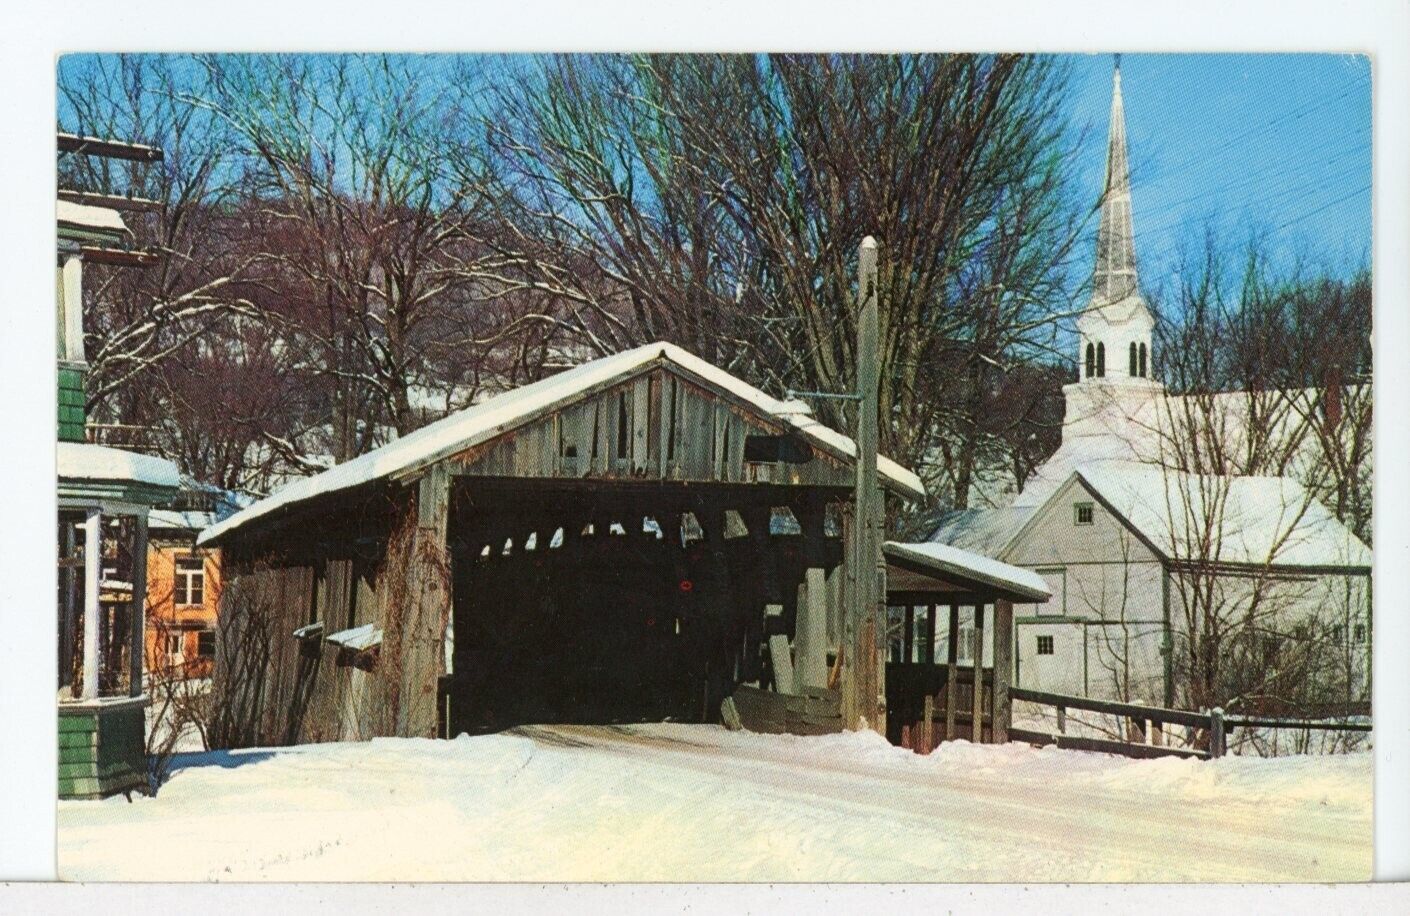 The Old Covered Bridge in Winter, Waitsfield, VT 1970s Postcard